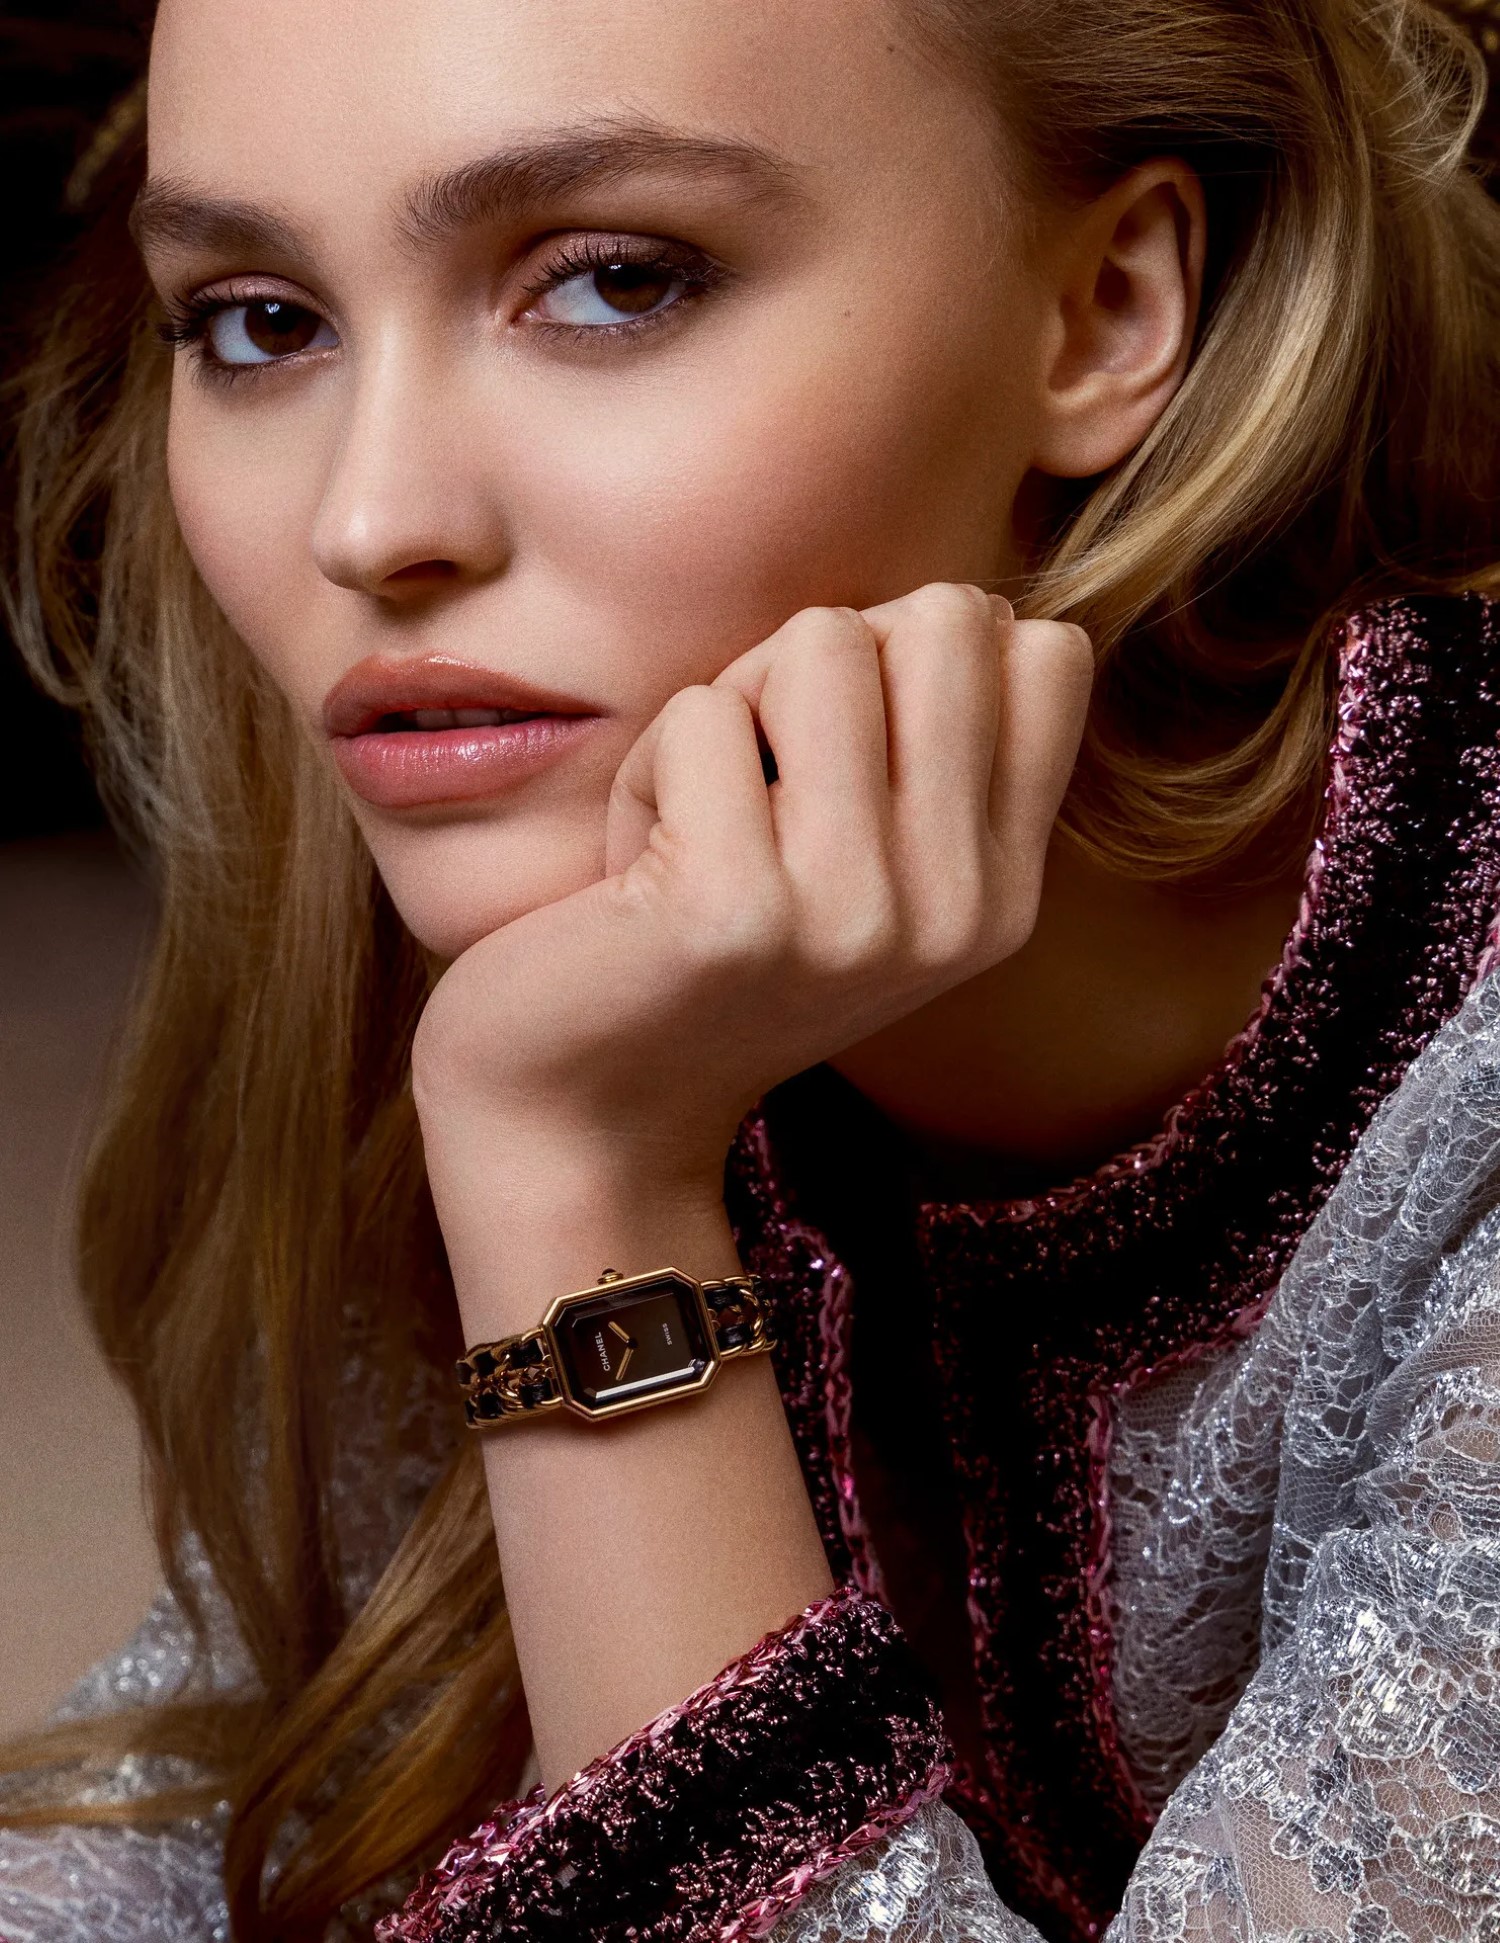 Lily-Rose Depp takes center stage in Chanel Première Edition Watch campaign